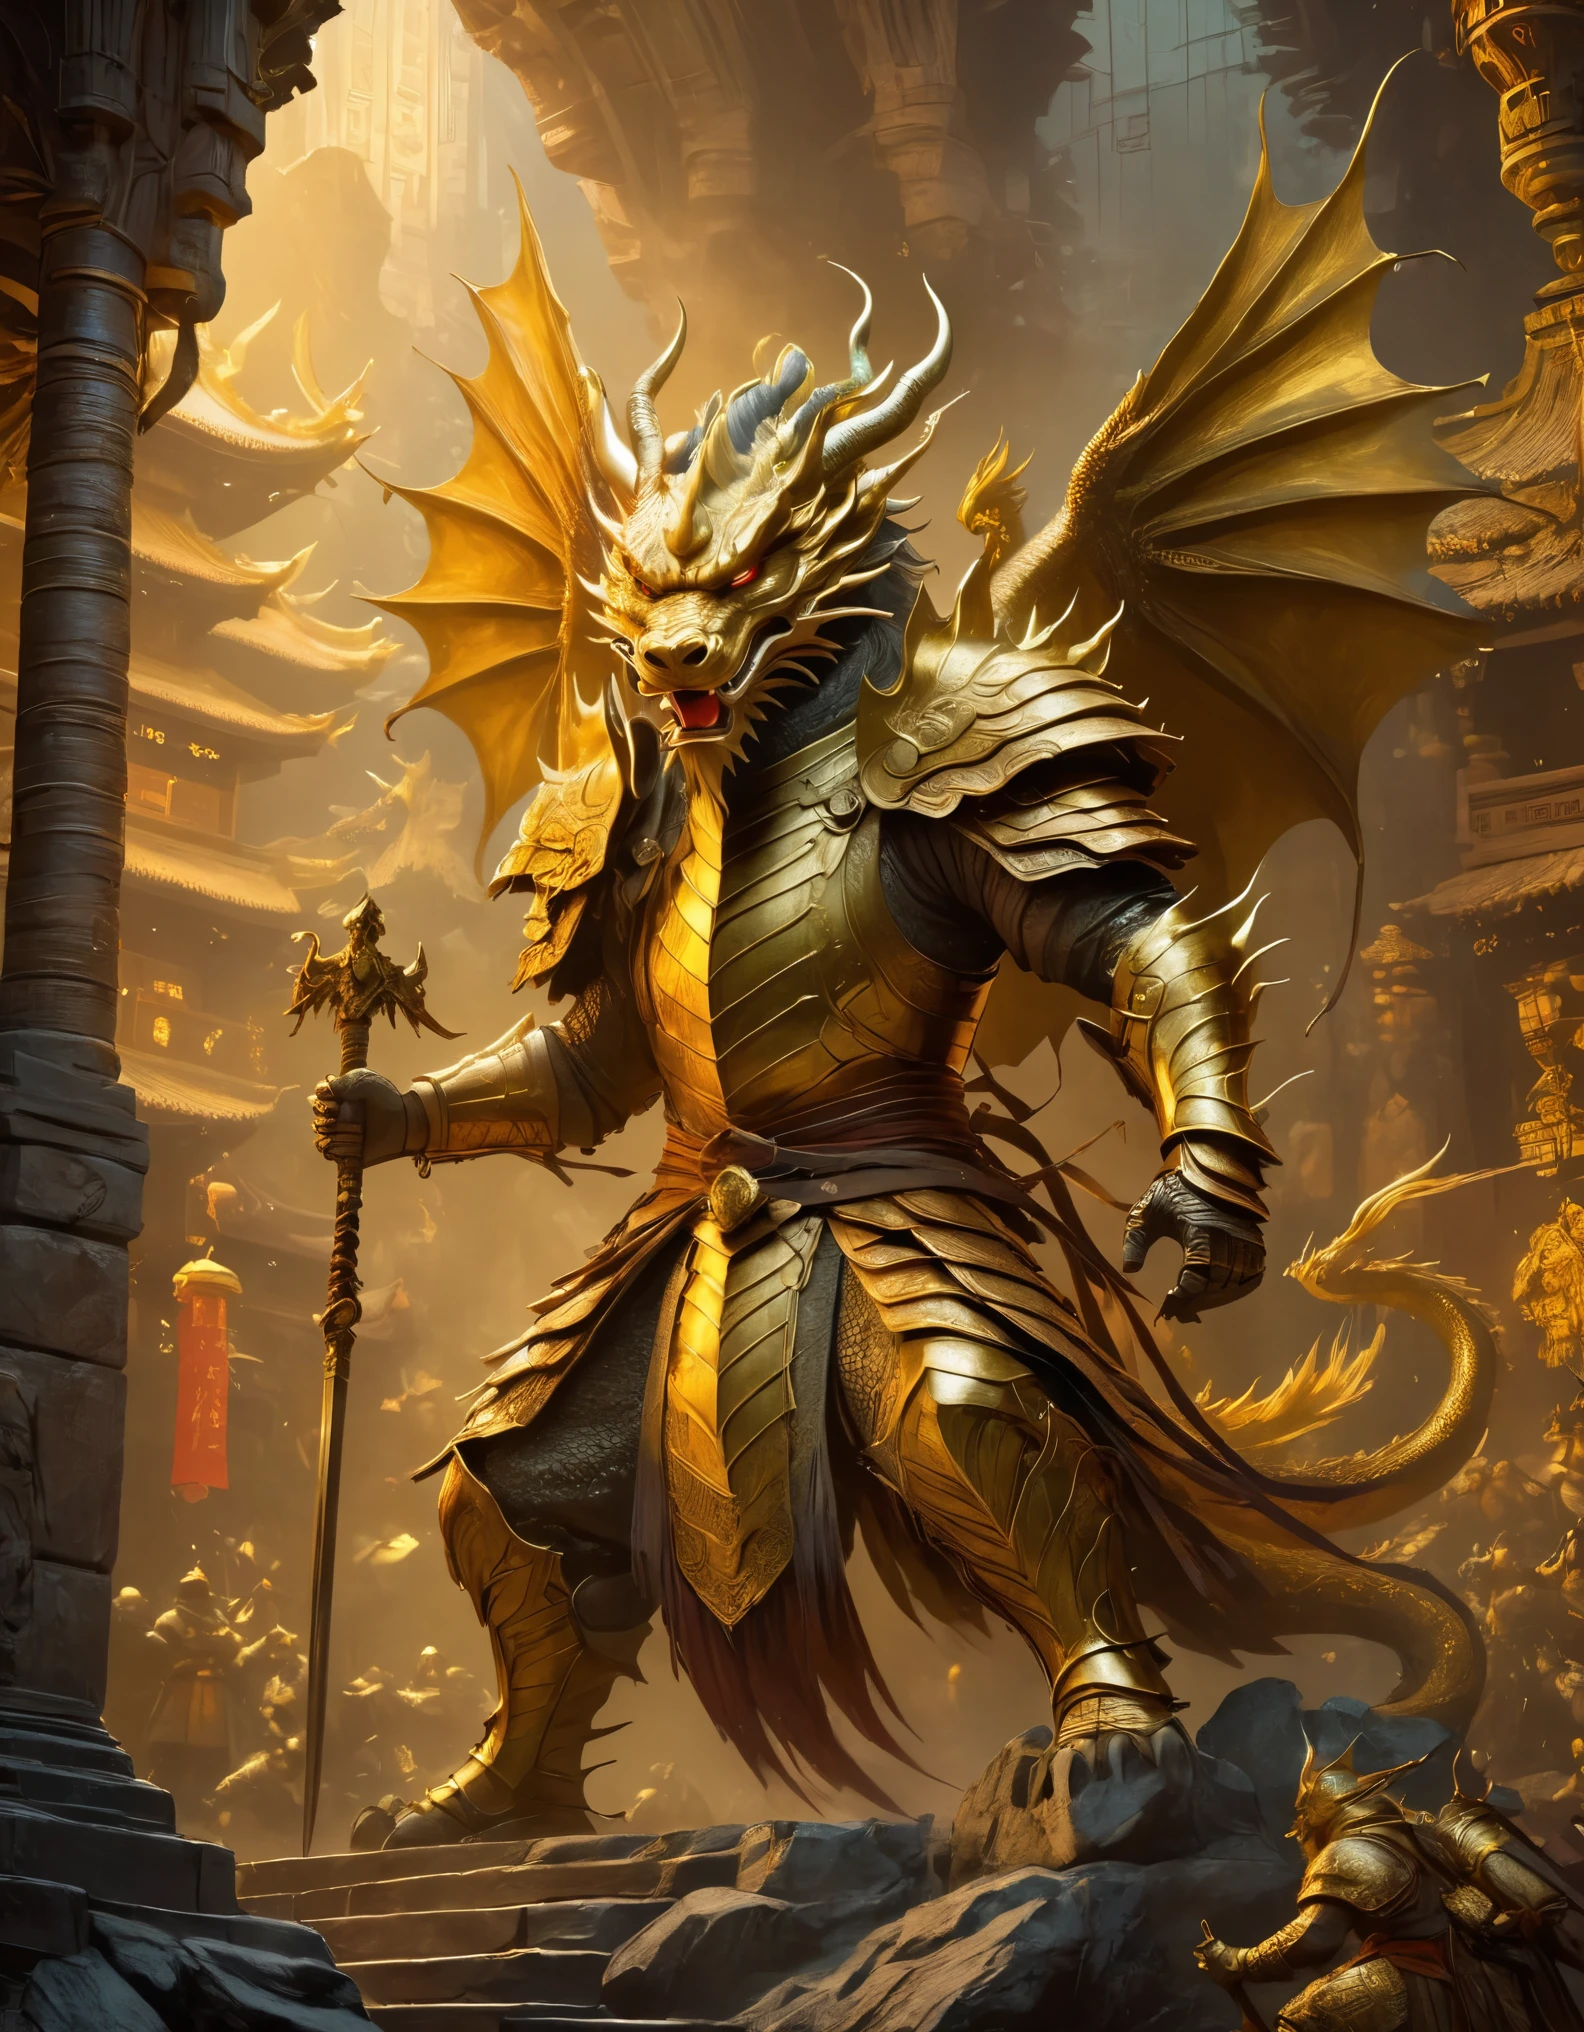 (anthropomorphic Chinese dragon warrior in golden armor fighting enemies), swinging sword through dungeon roof, iper quality, iper detail, intricate detail, octan rendering, film, standing facing audience, mythological creatures, hermit, concept art, wide angle, full composition, dynamic lighting, movie